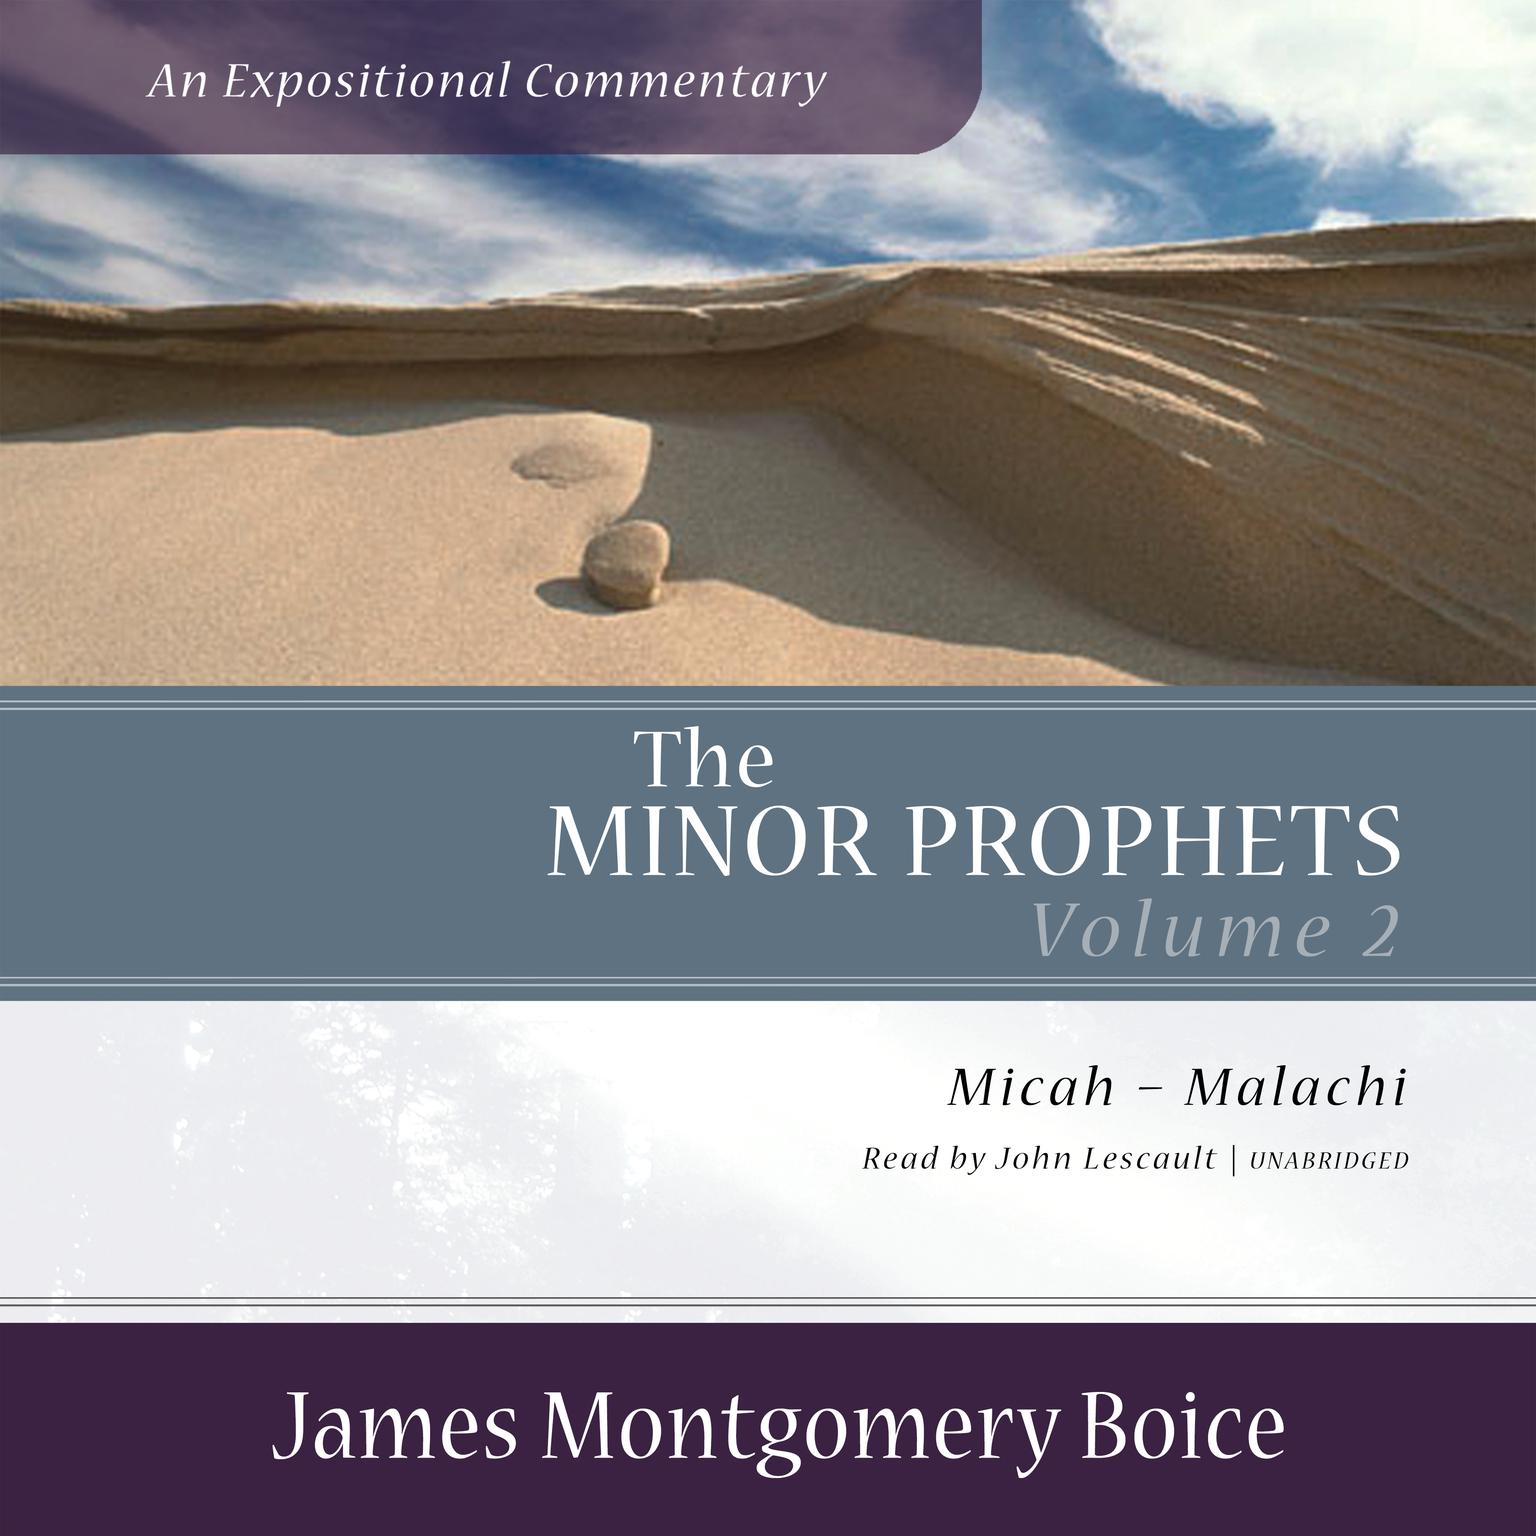 The Minor Prophets: An Expositional Commentary, Volume 2: Micah–Malachi Audiobook, by James Montgomery Boice